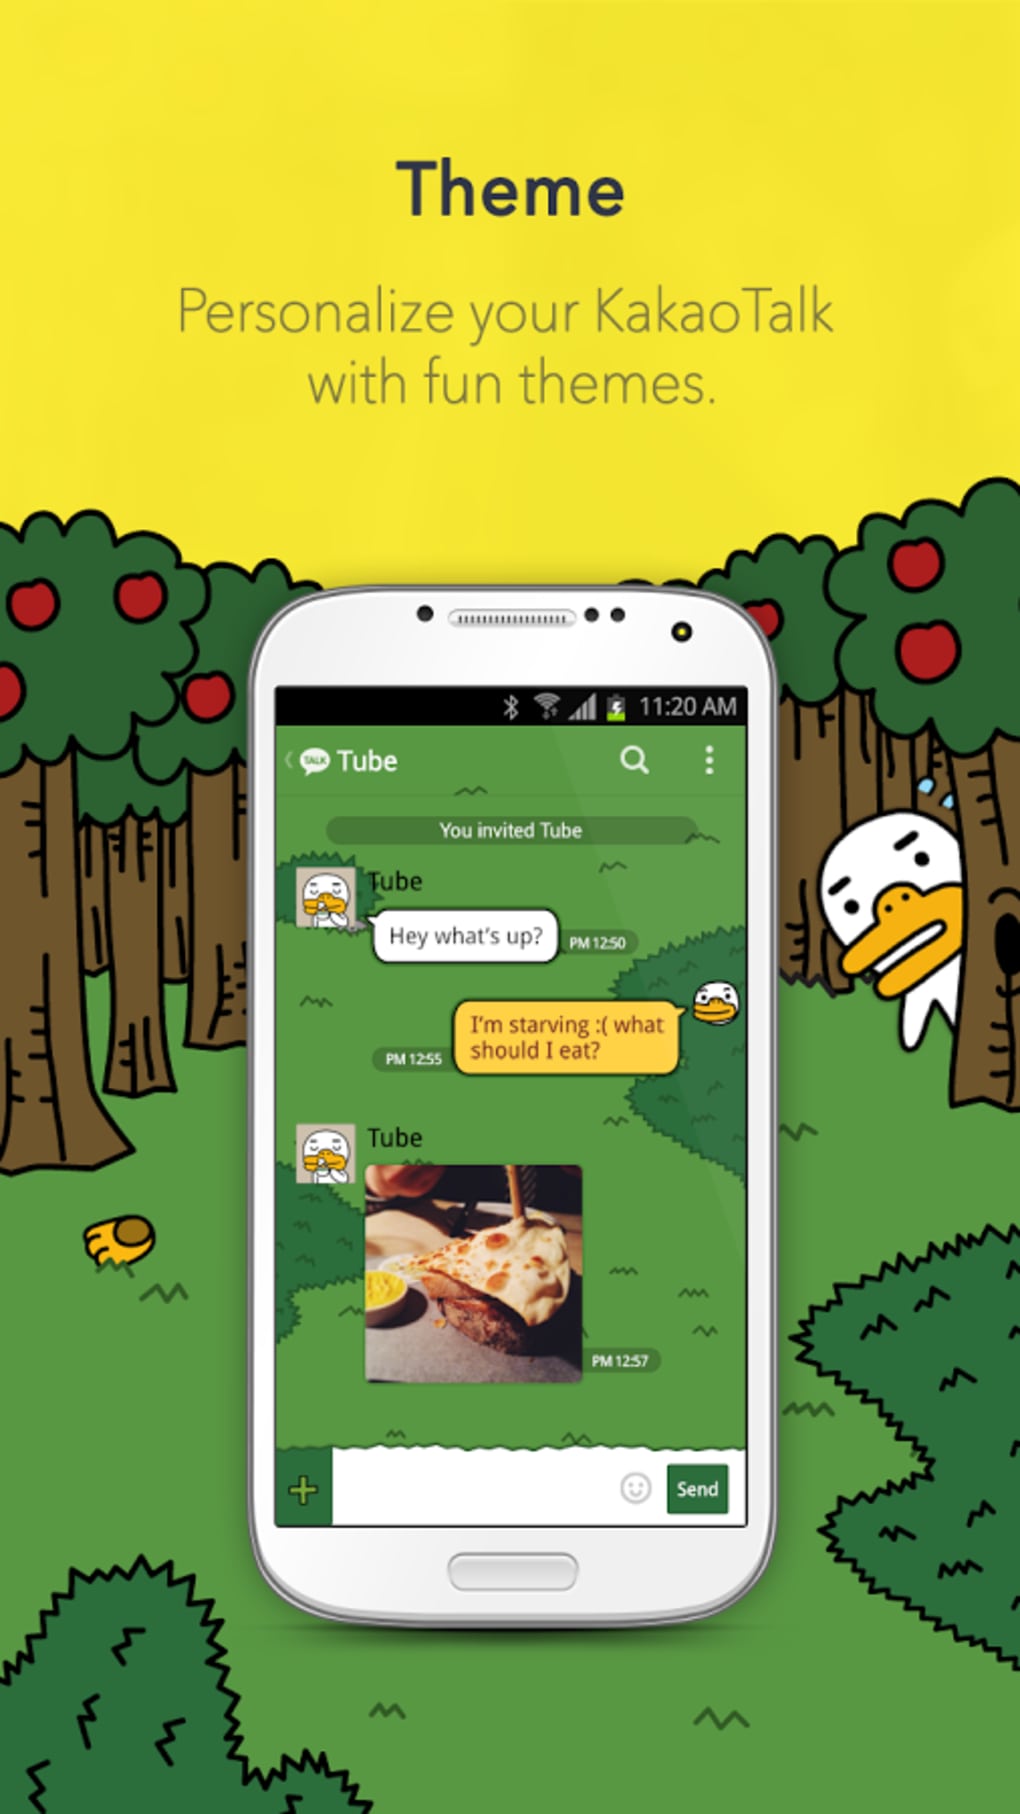 where does kakaotalk store chats androis